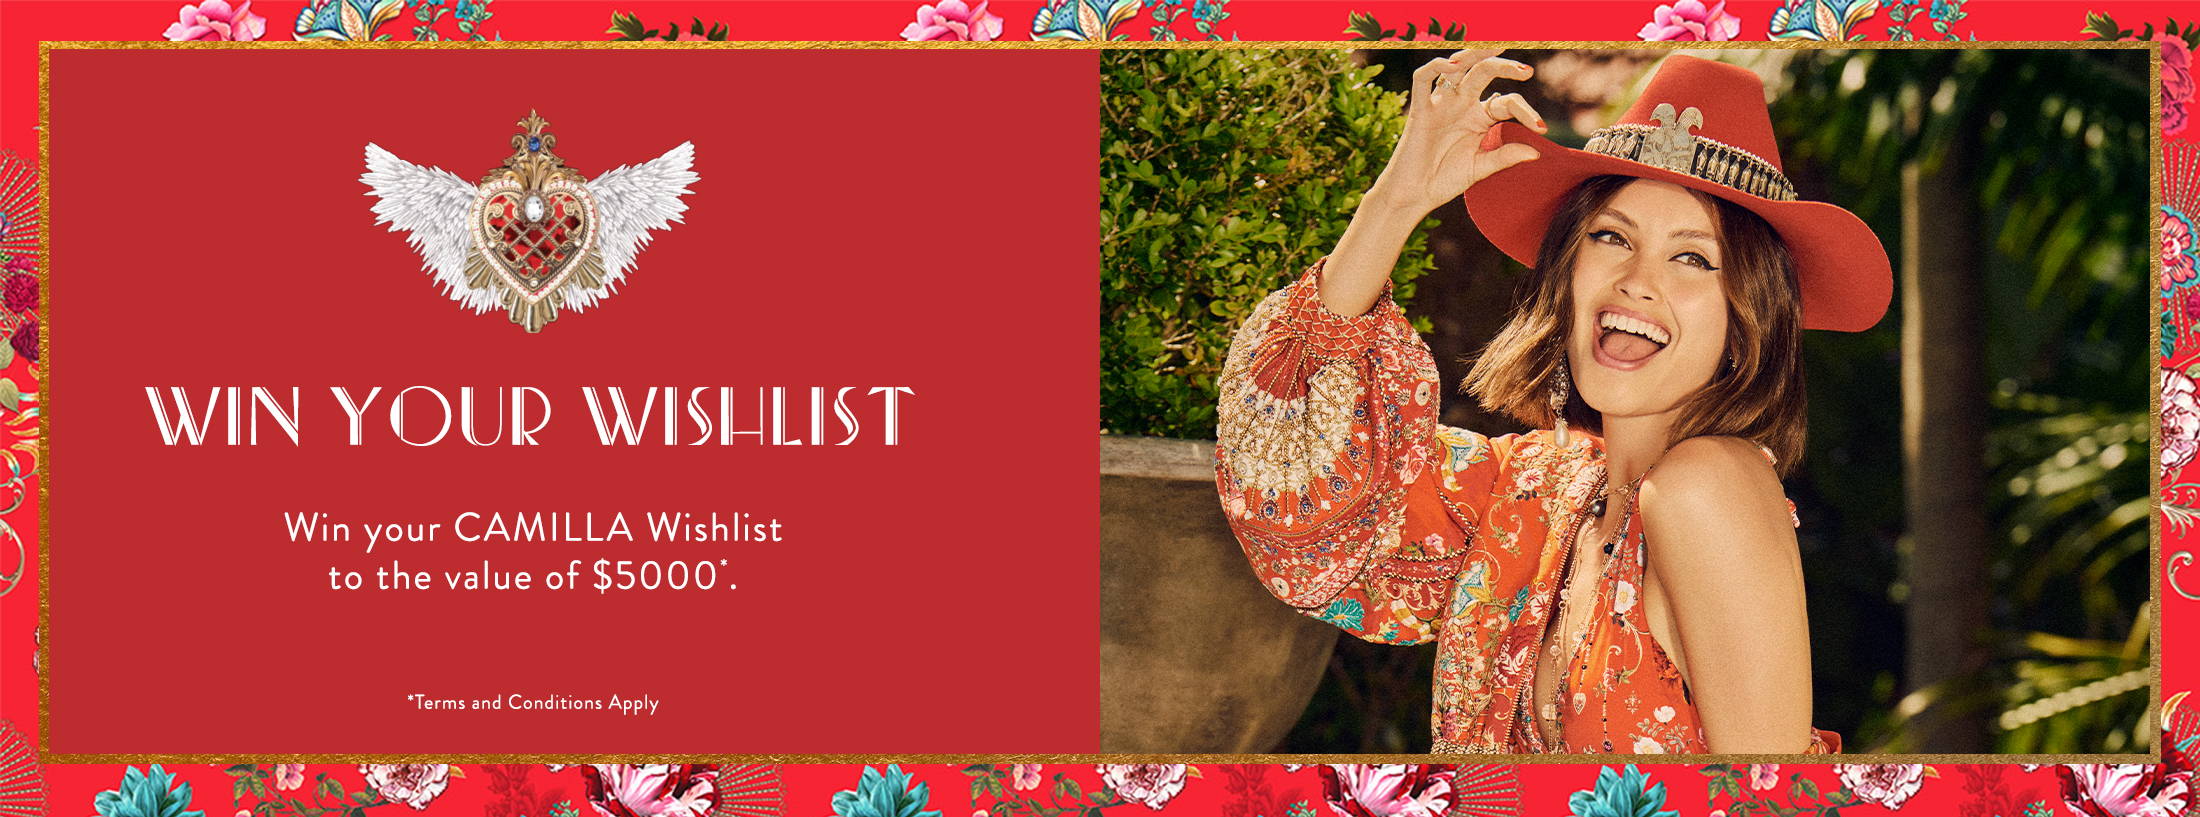 Win Your Wishlist | Win your CAMILLA wishlist to the value of $5000